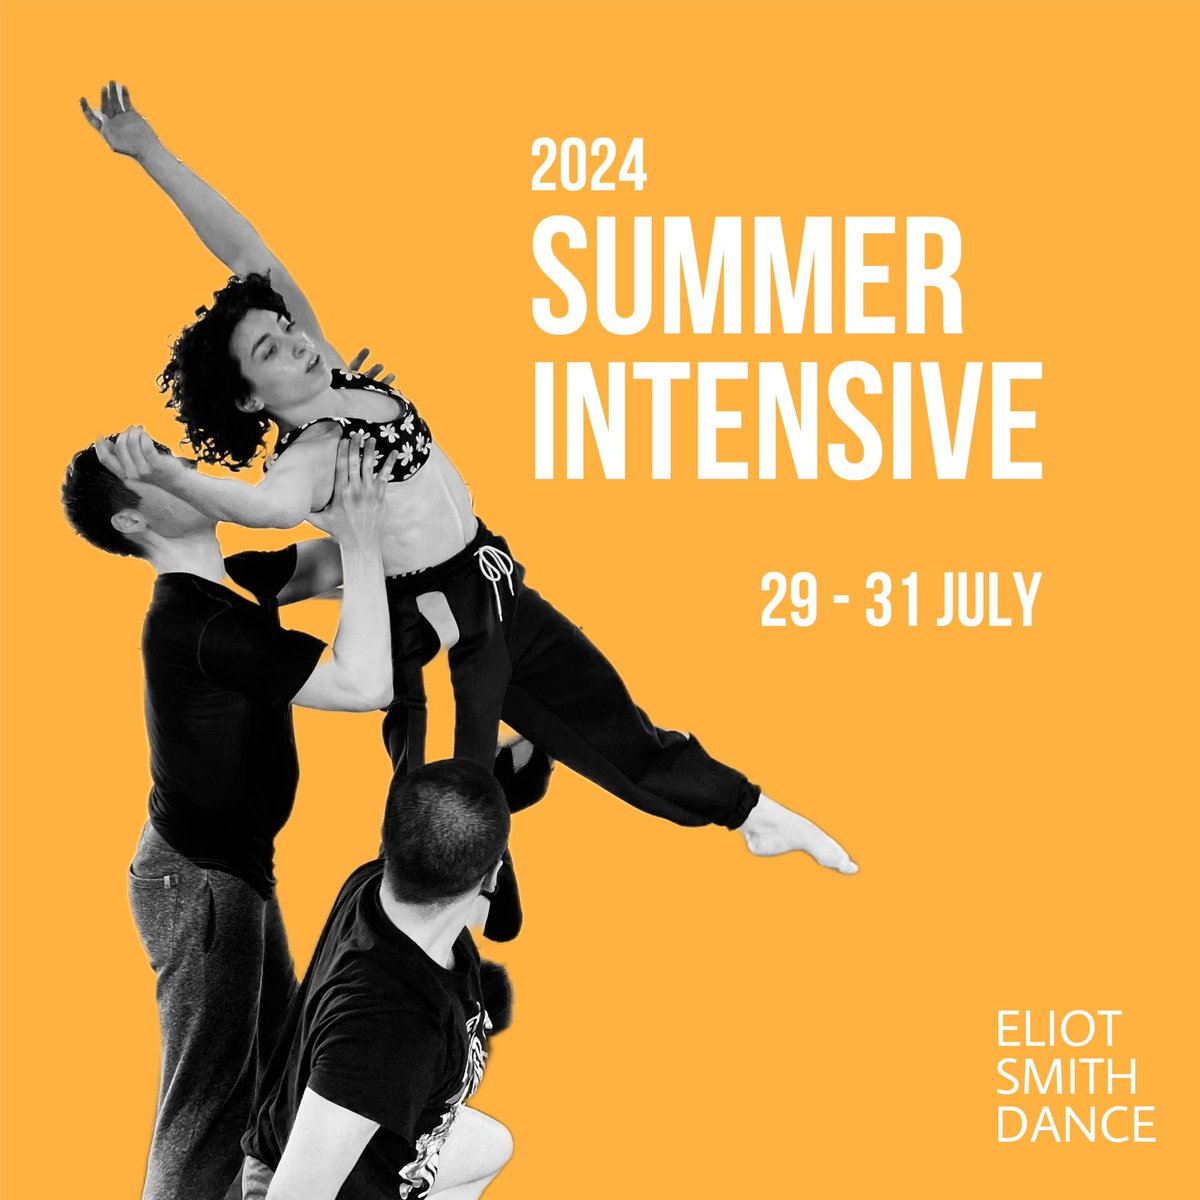 Summer is just around the corner ☀️ It’s time to get ready for Eliot Smith Dance 2024 Summer Intensive, 29 – 31 July! 💥 Ballet 💥 Contemporary 💥 Repertory 💥 Q&A, Lunch Provided 💥 Performance Only 5 spots left ❗️Register quick at: eliotsmithdance.com/intensive